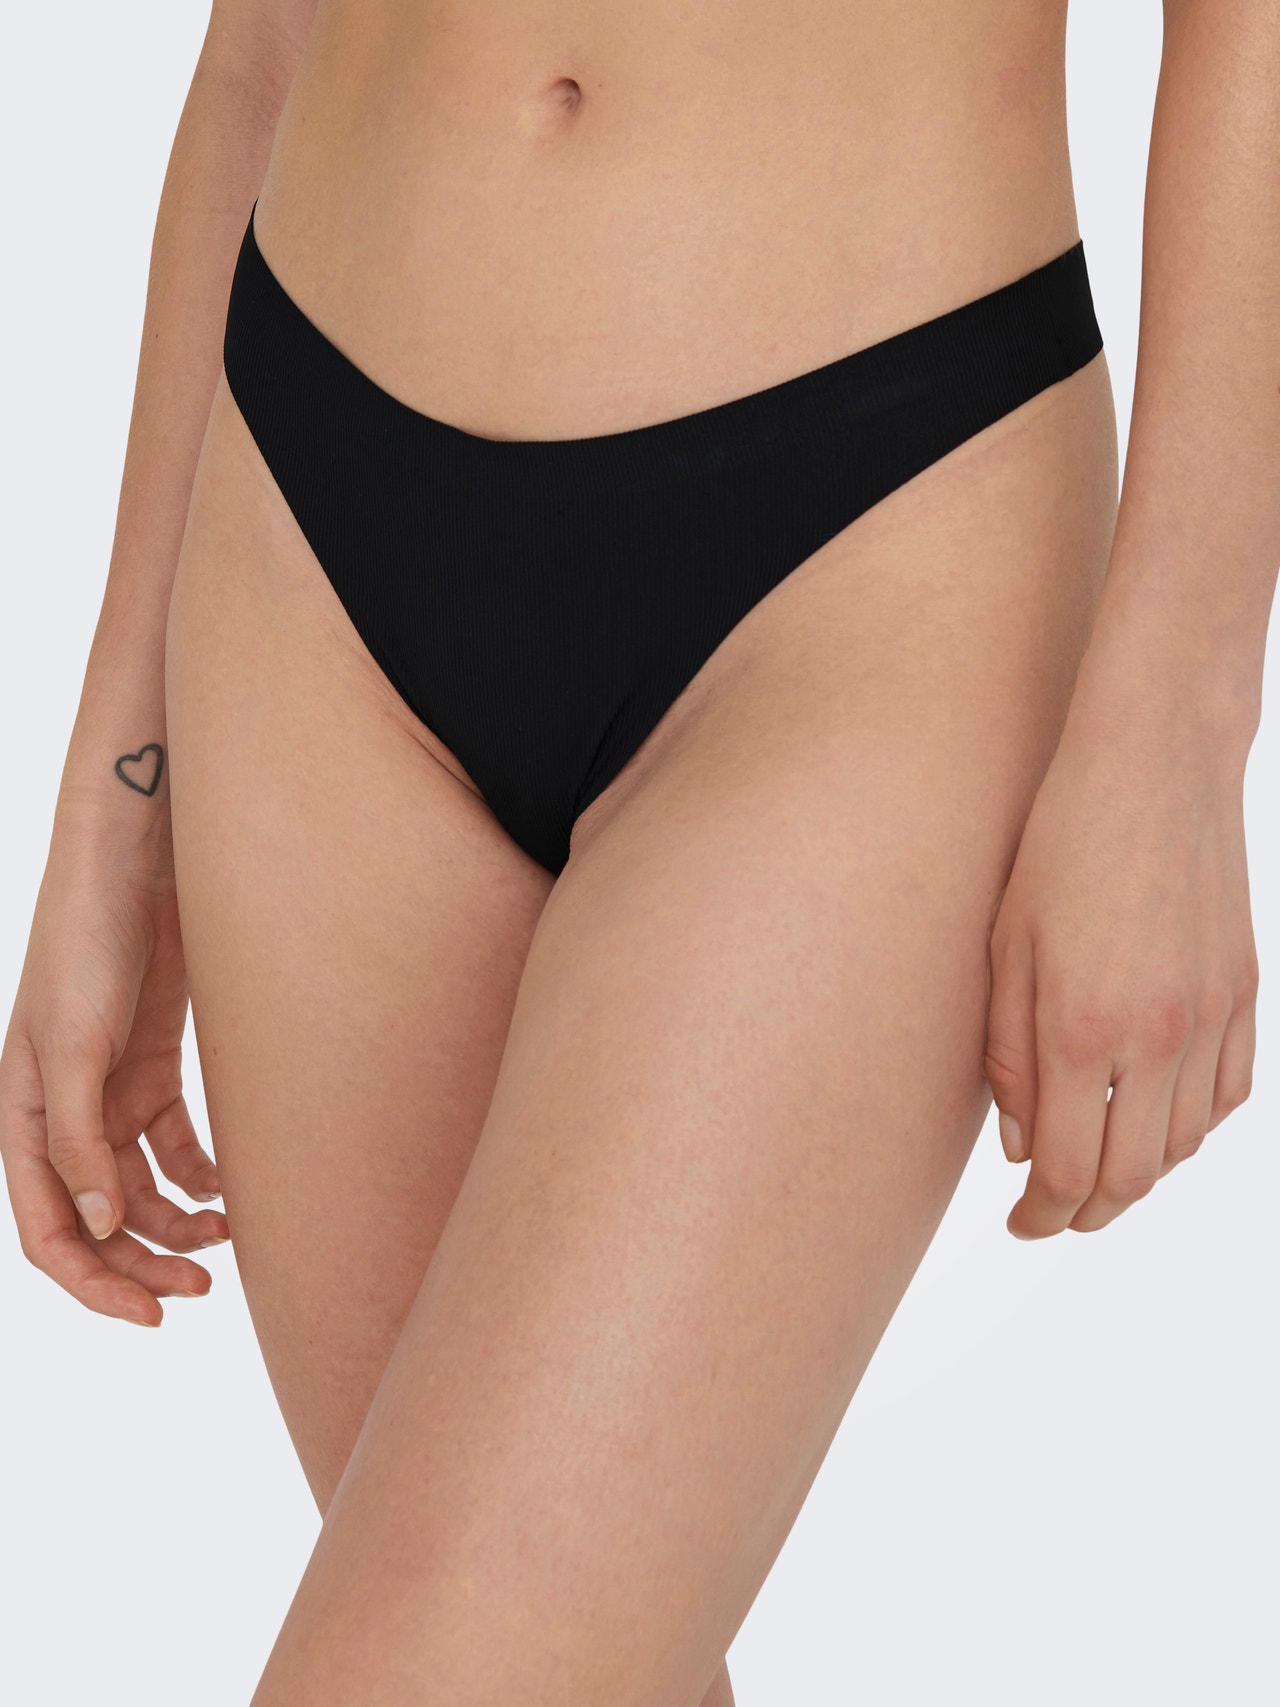 https://images.only.com/15301151/4298560/005/only-3-packseamlessthongs-black.jpg?v=88e84e24bc5fcb7e3b472a27f23be945&format=webp&width=1280&quality=90&key=25-0-3